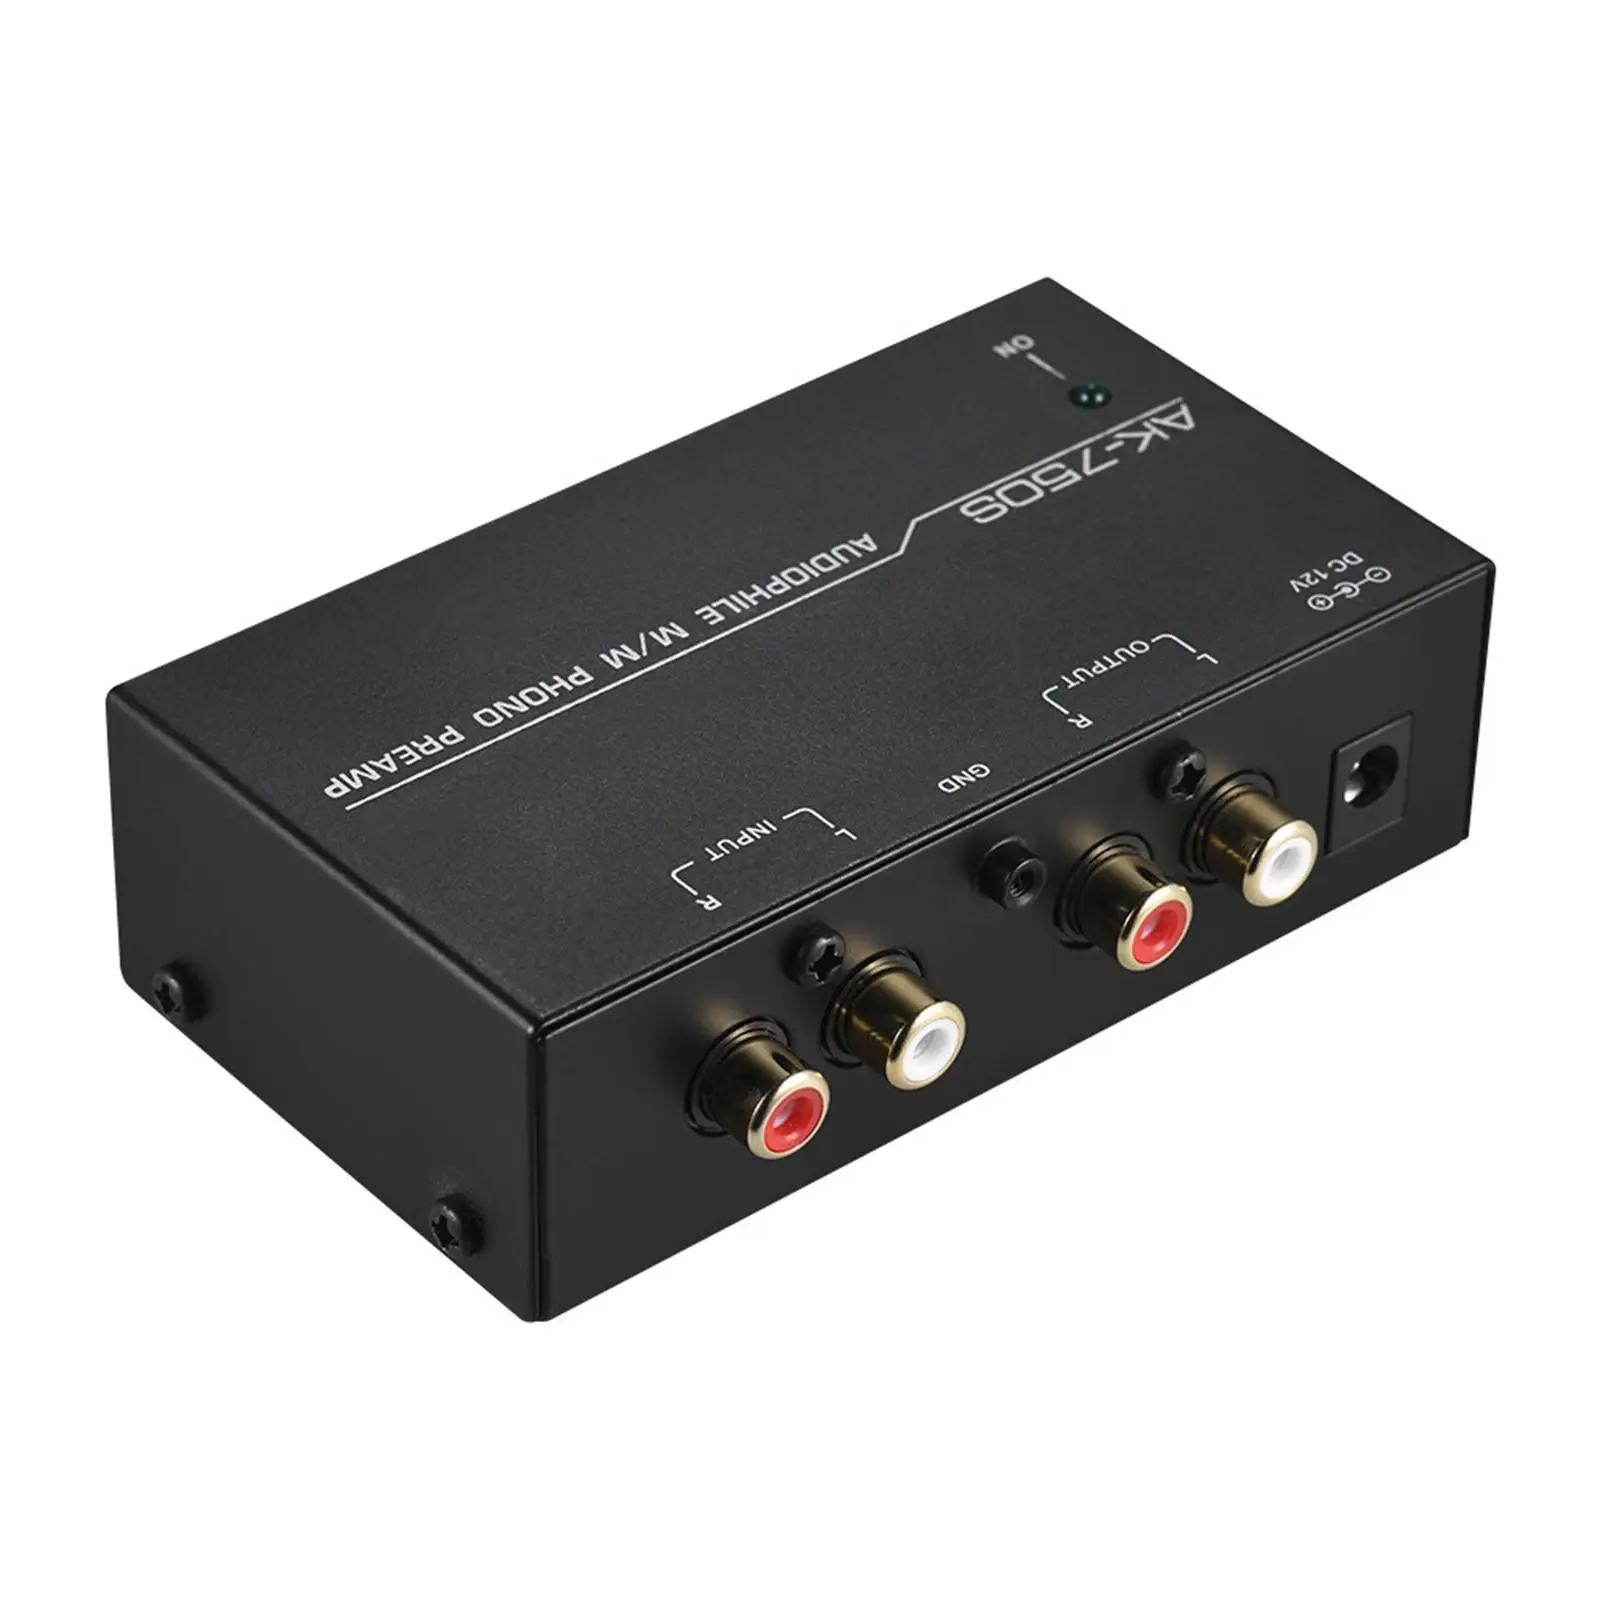 Phono Preamp Preamplifier US Standard Plug with Level Konbs Professional Excellent Sound ,2Xrca Input, 2Xrca Output ,Black